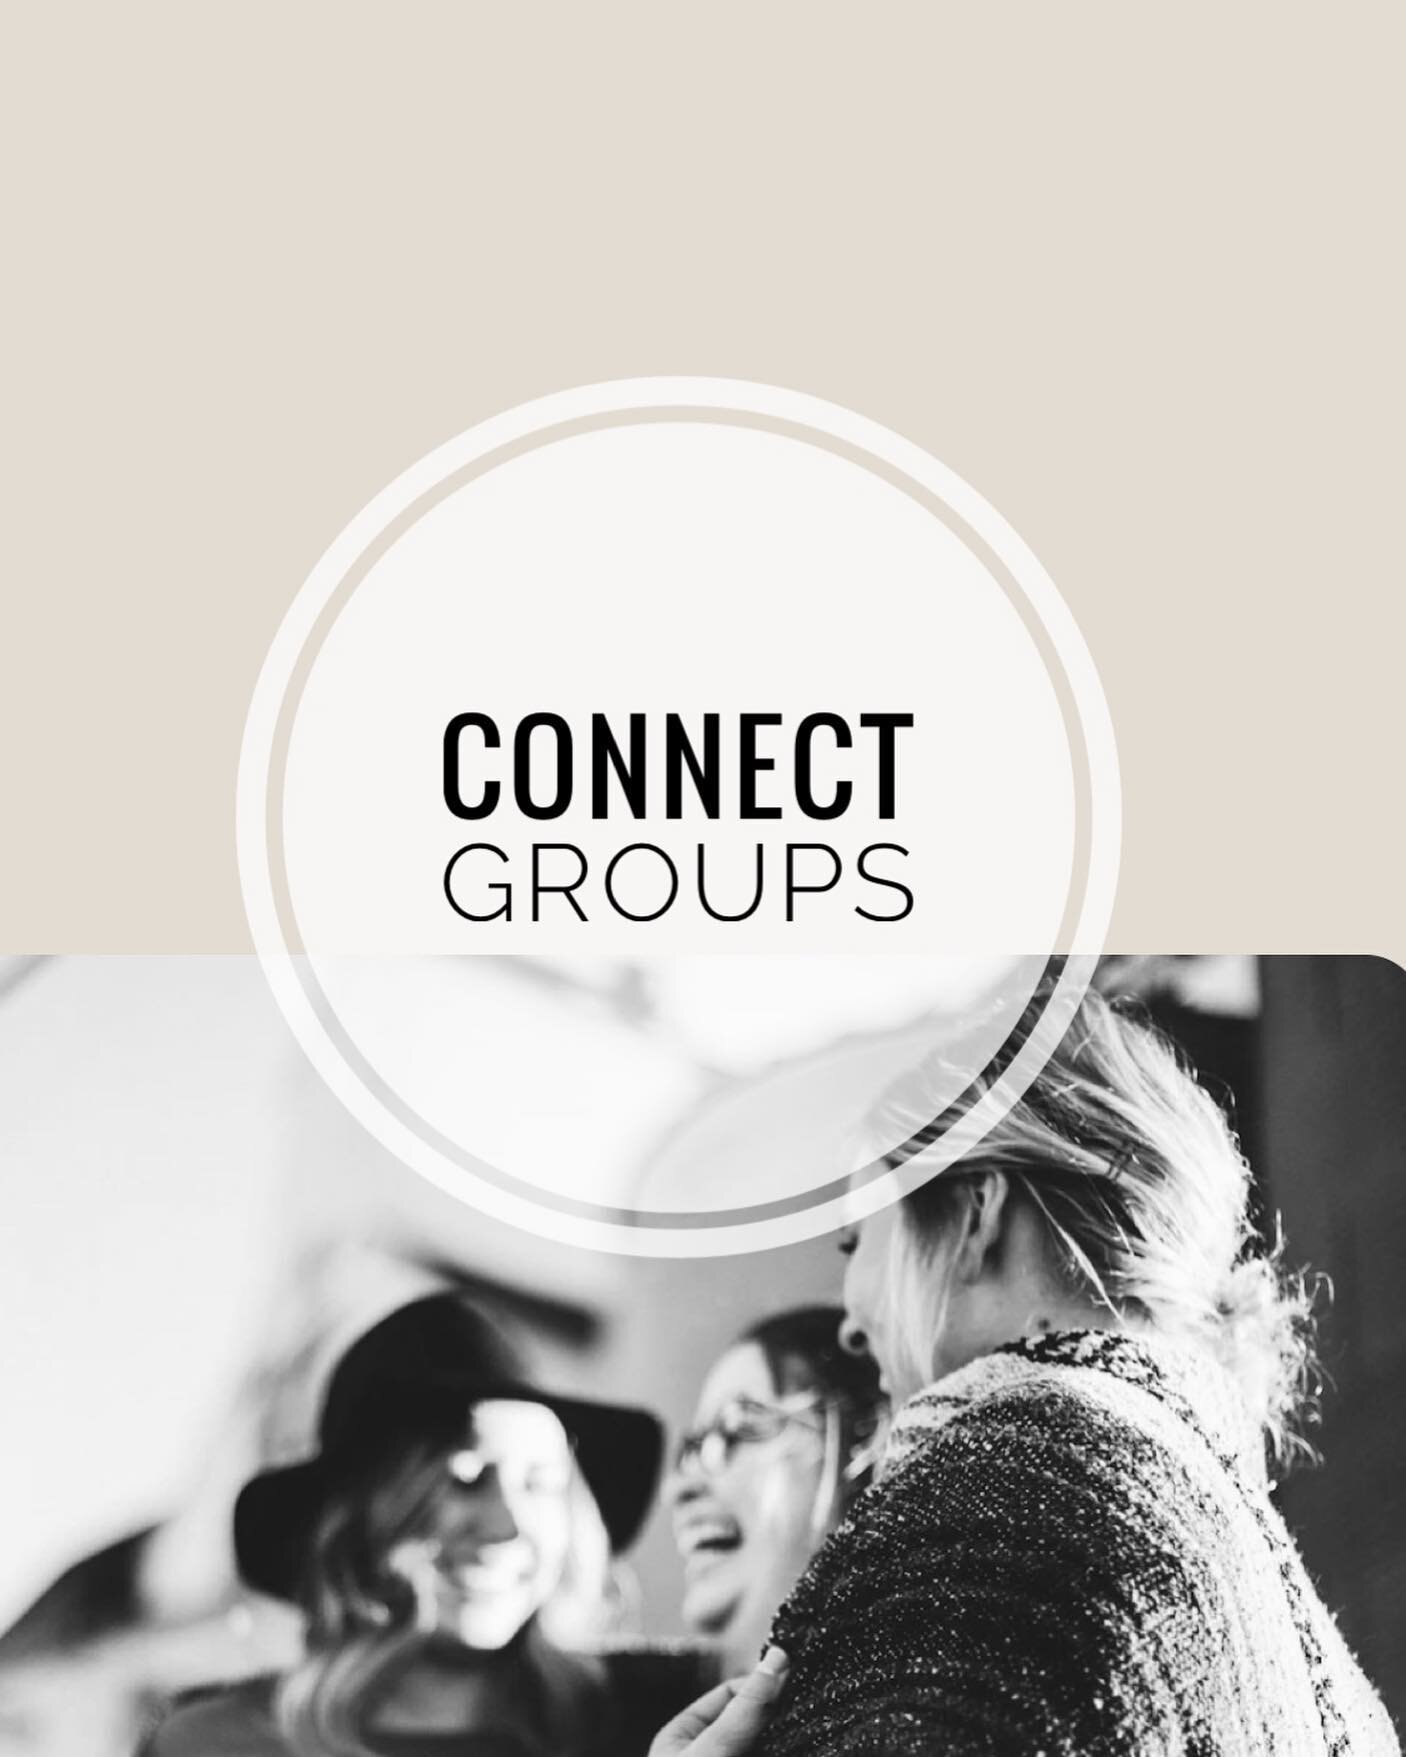 We&rsquo;re looking forward to seeing you tomorrow at Connect groups! 
Start time: 7:30pm
Location: Elmira - 35 Finoro Crescent Kitchener - ***alrernate address**
10 Kristi Place Kitchener 
See you then!